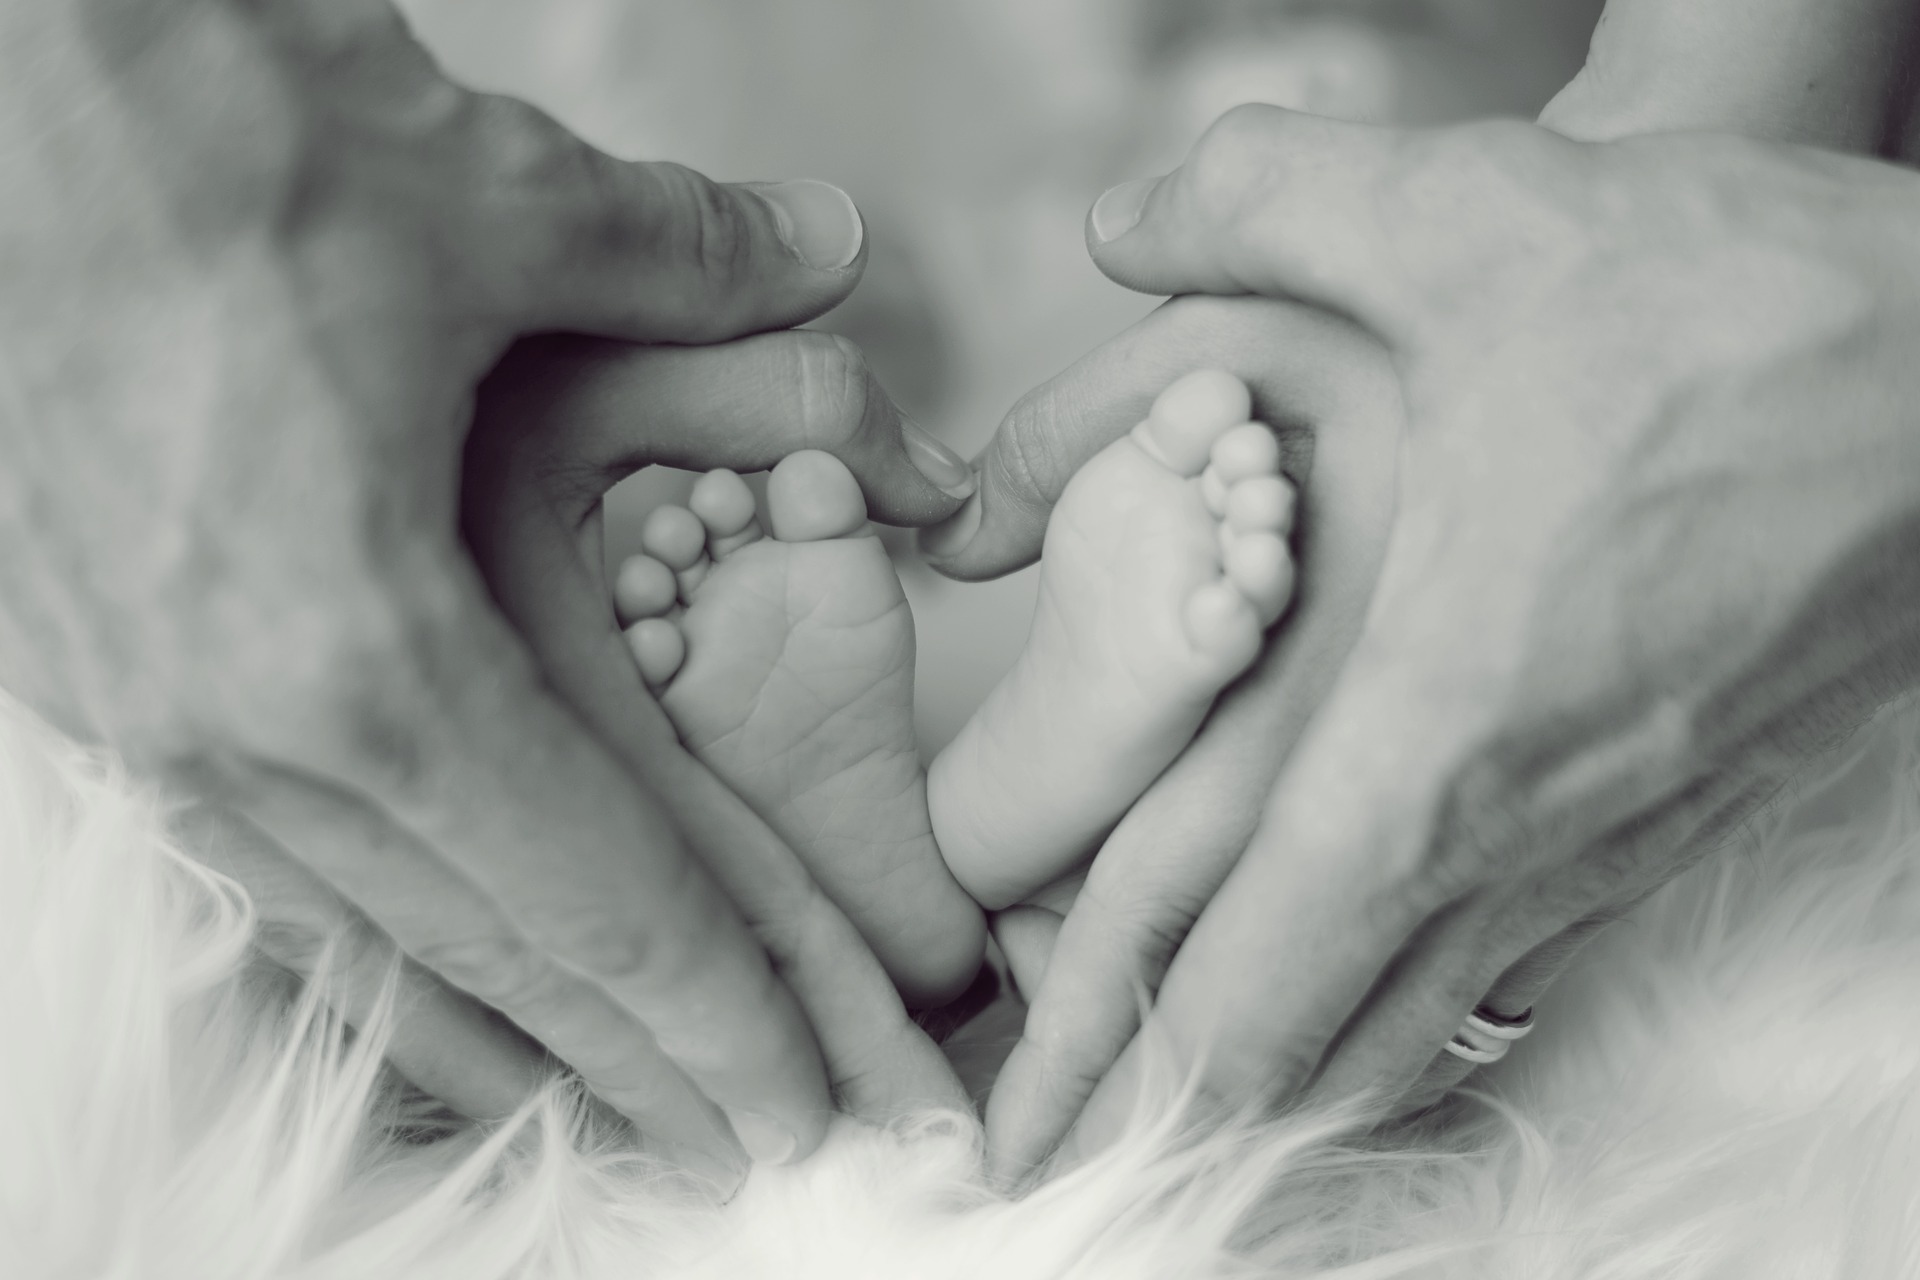 Parents' hands in a heart shape around a baby's feet